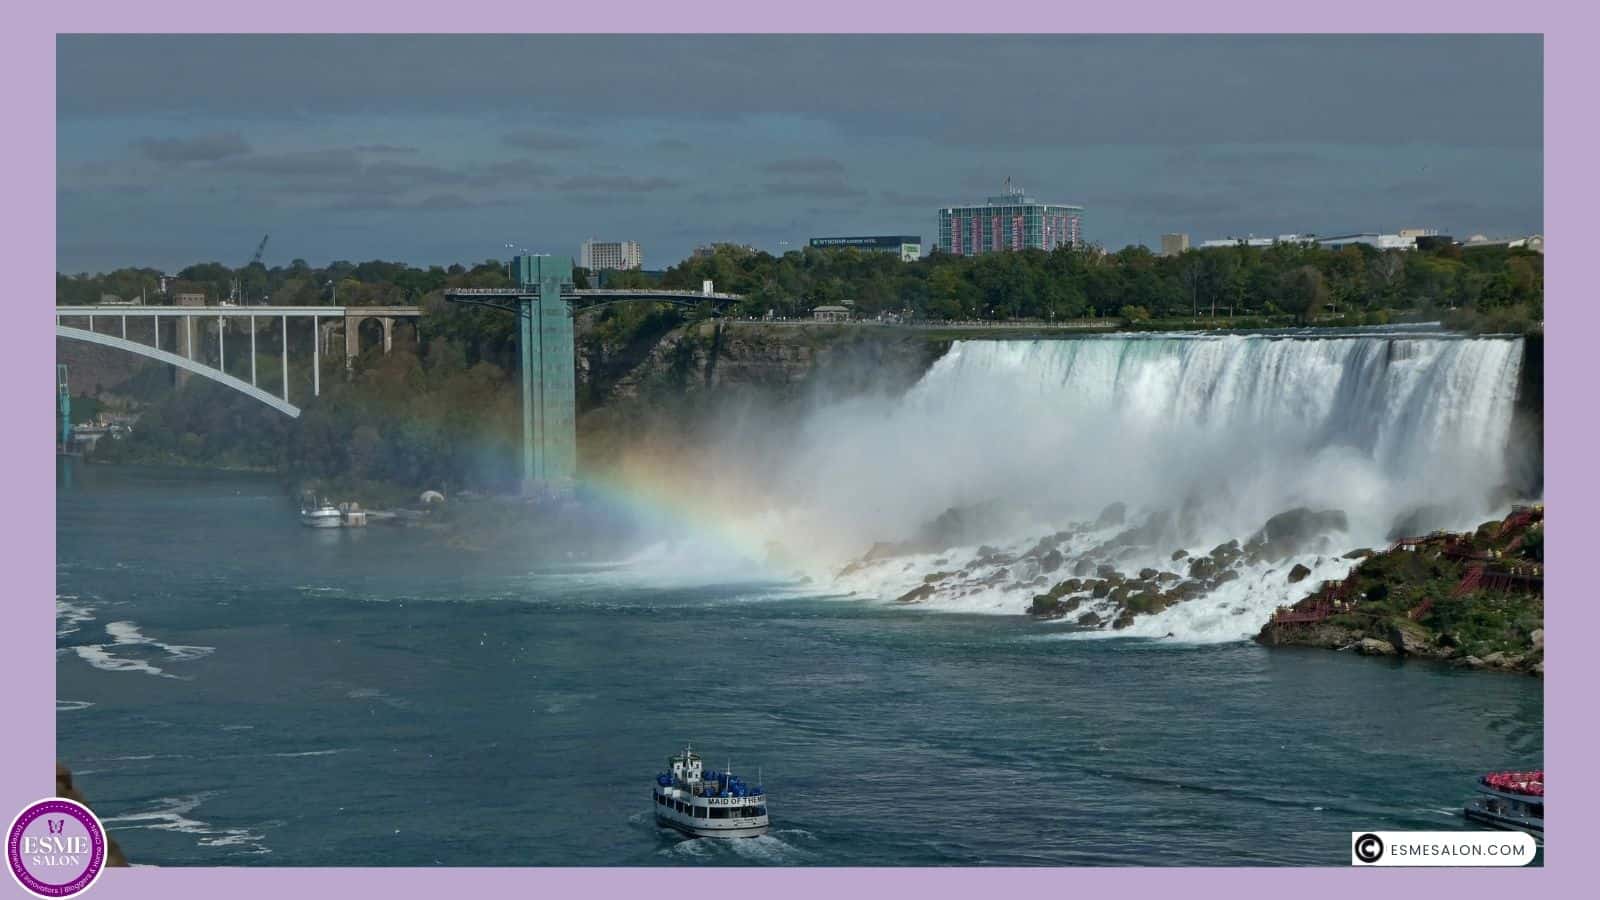 an image of Niagara Falls with Maid of the Mist in the forground